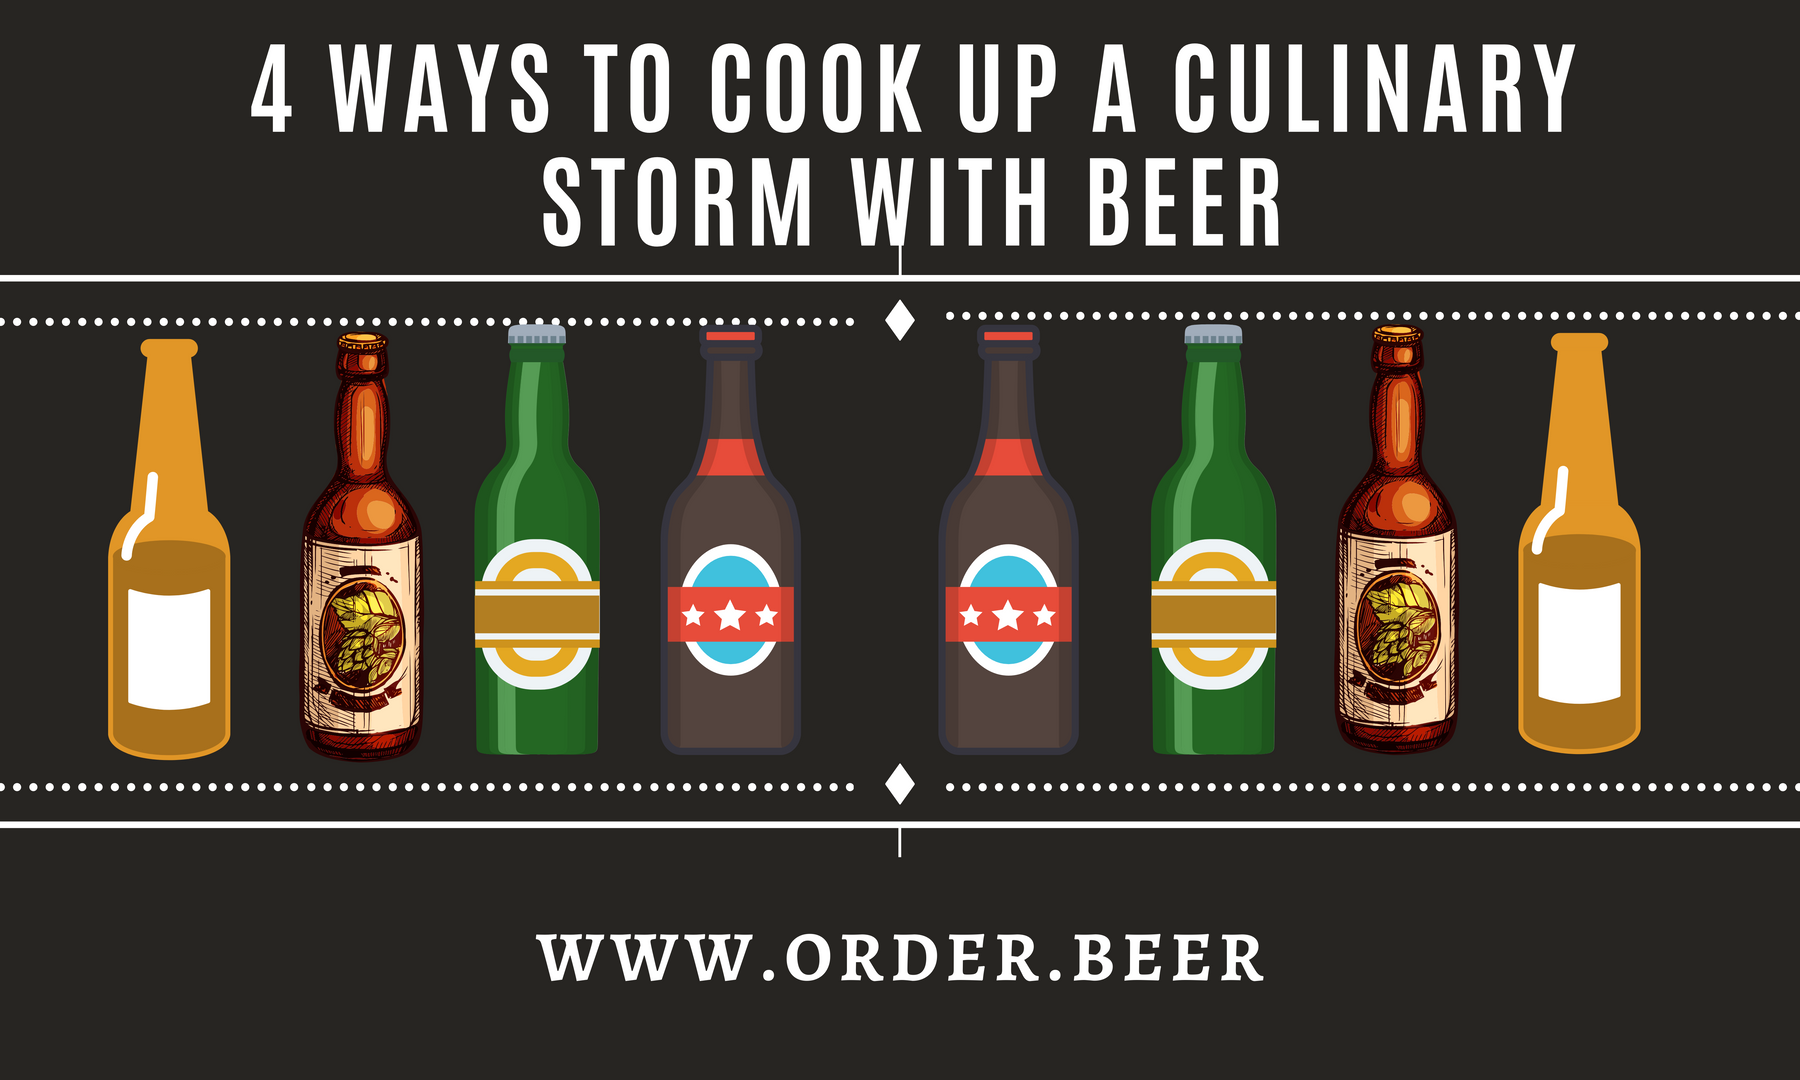 4 ways to cook up a culinary storm with Beer